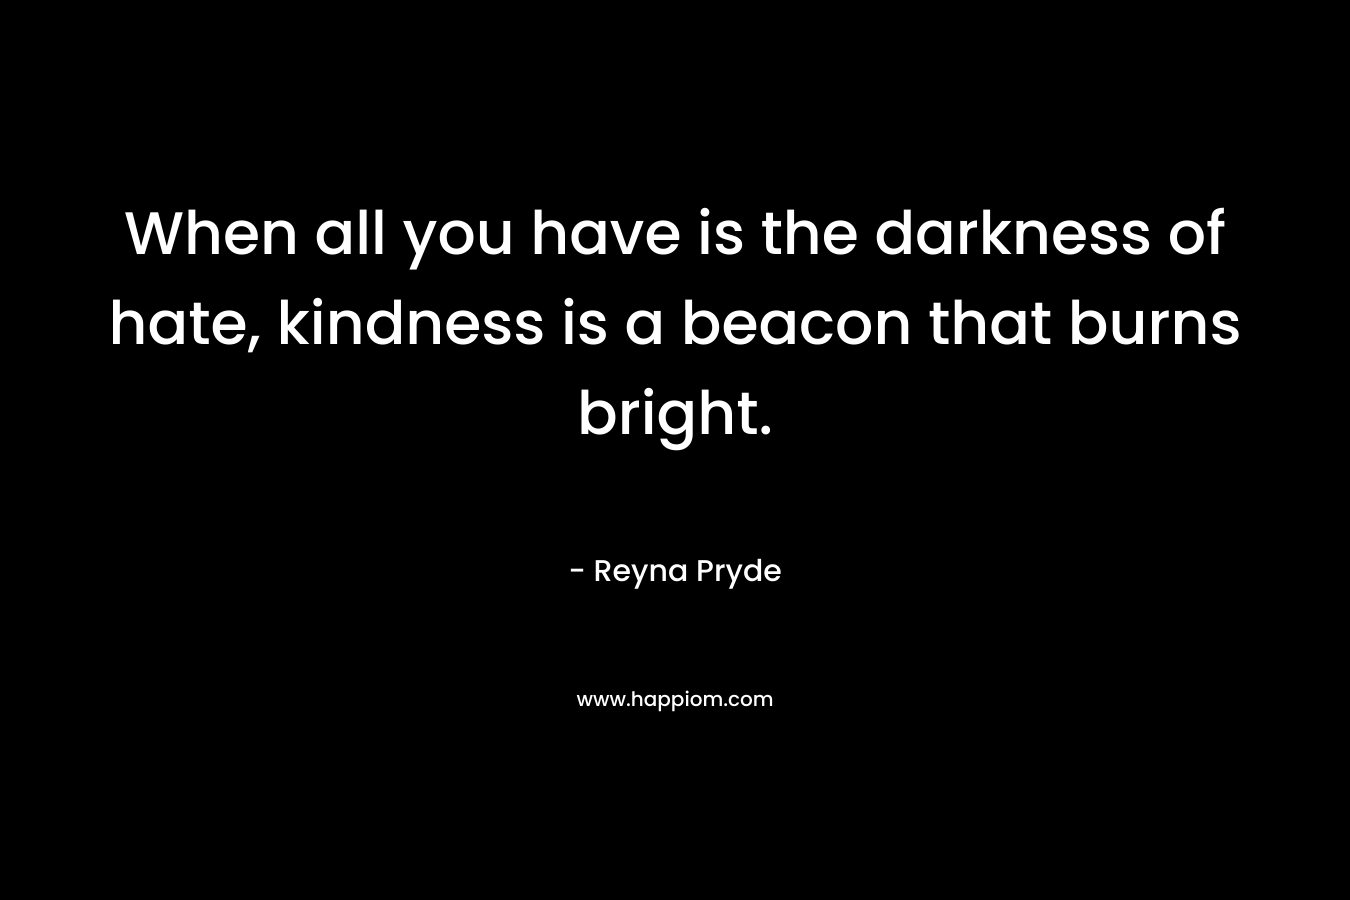 When all you have is the darkness of hate, kindness is a beacon that burns bright.